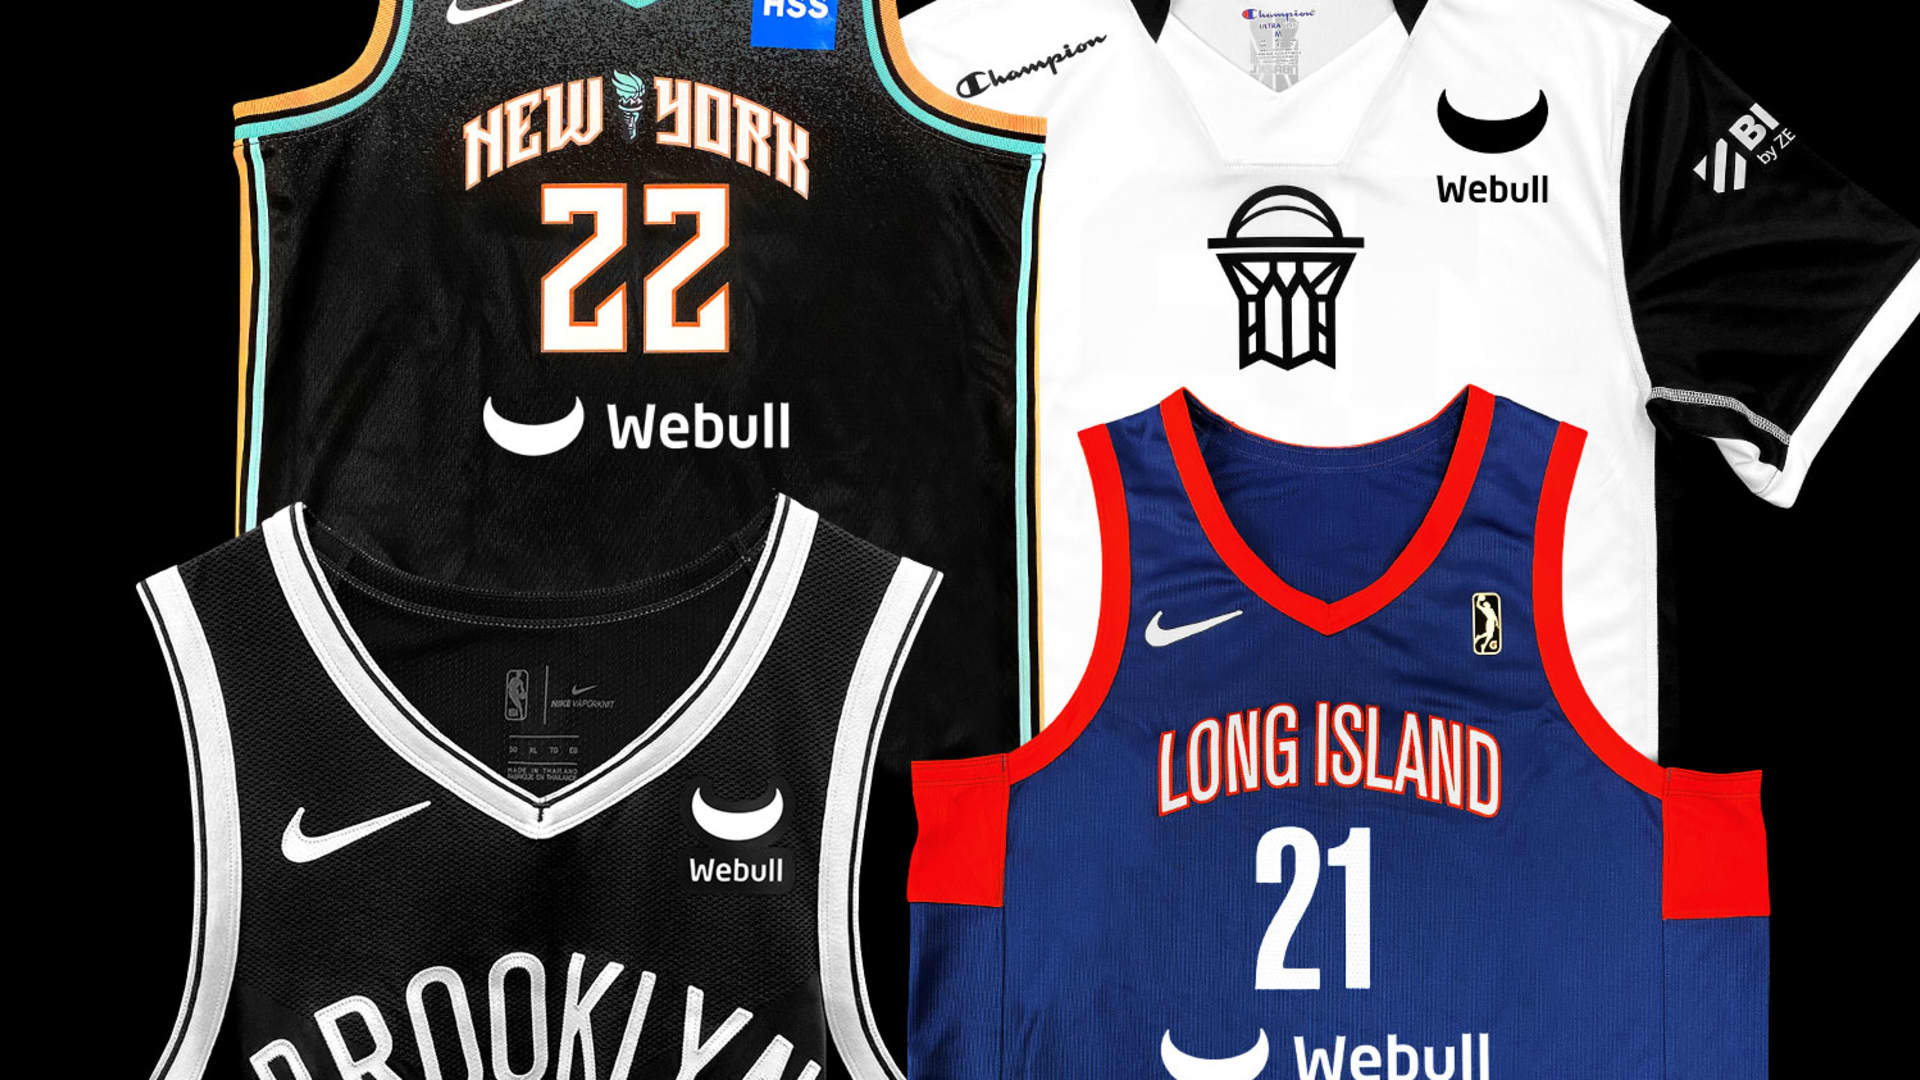 Brooklyn Nets patch with online finance company Webull